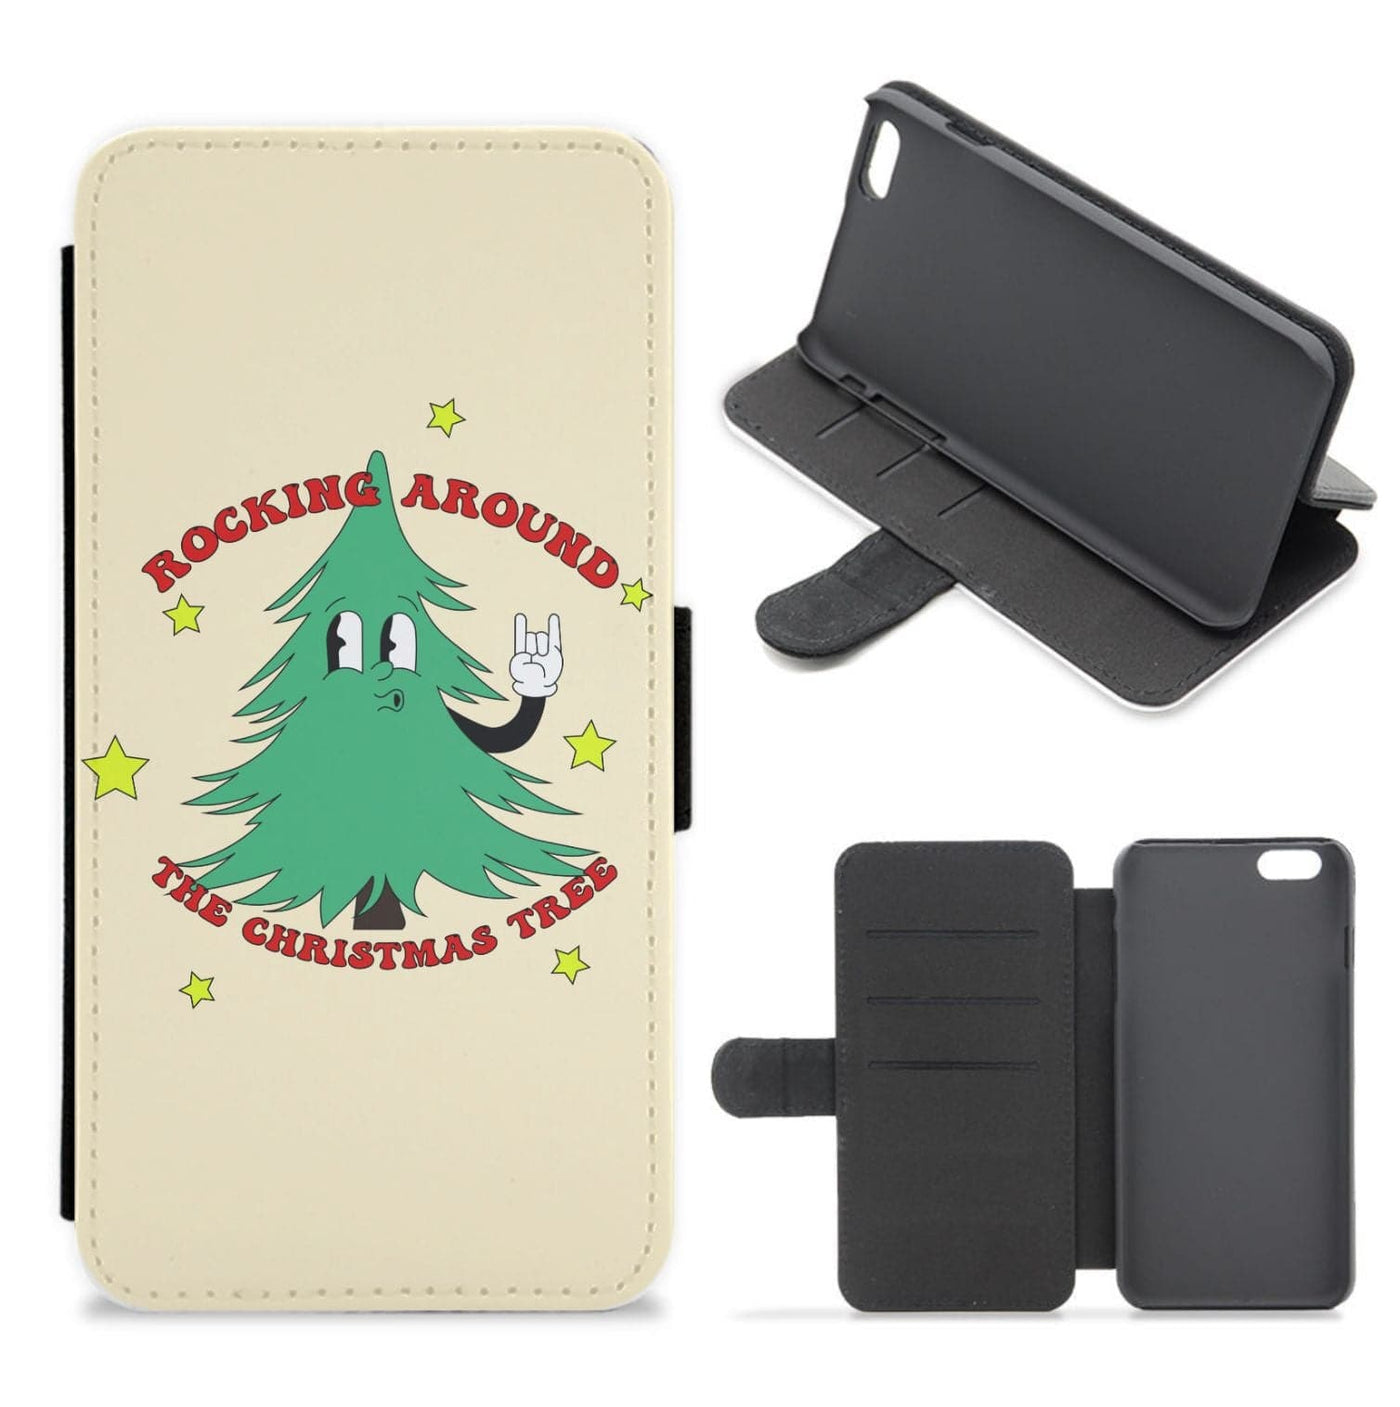 Rocking Around The Christmas Tree - Christmas Songs Flip / Wallet Phone Case